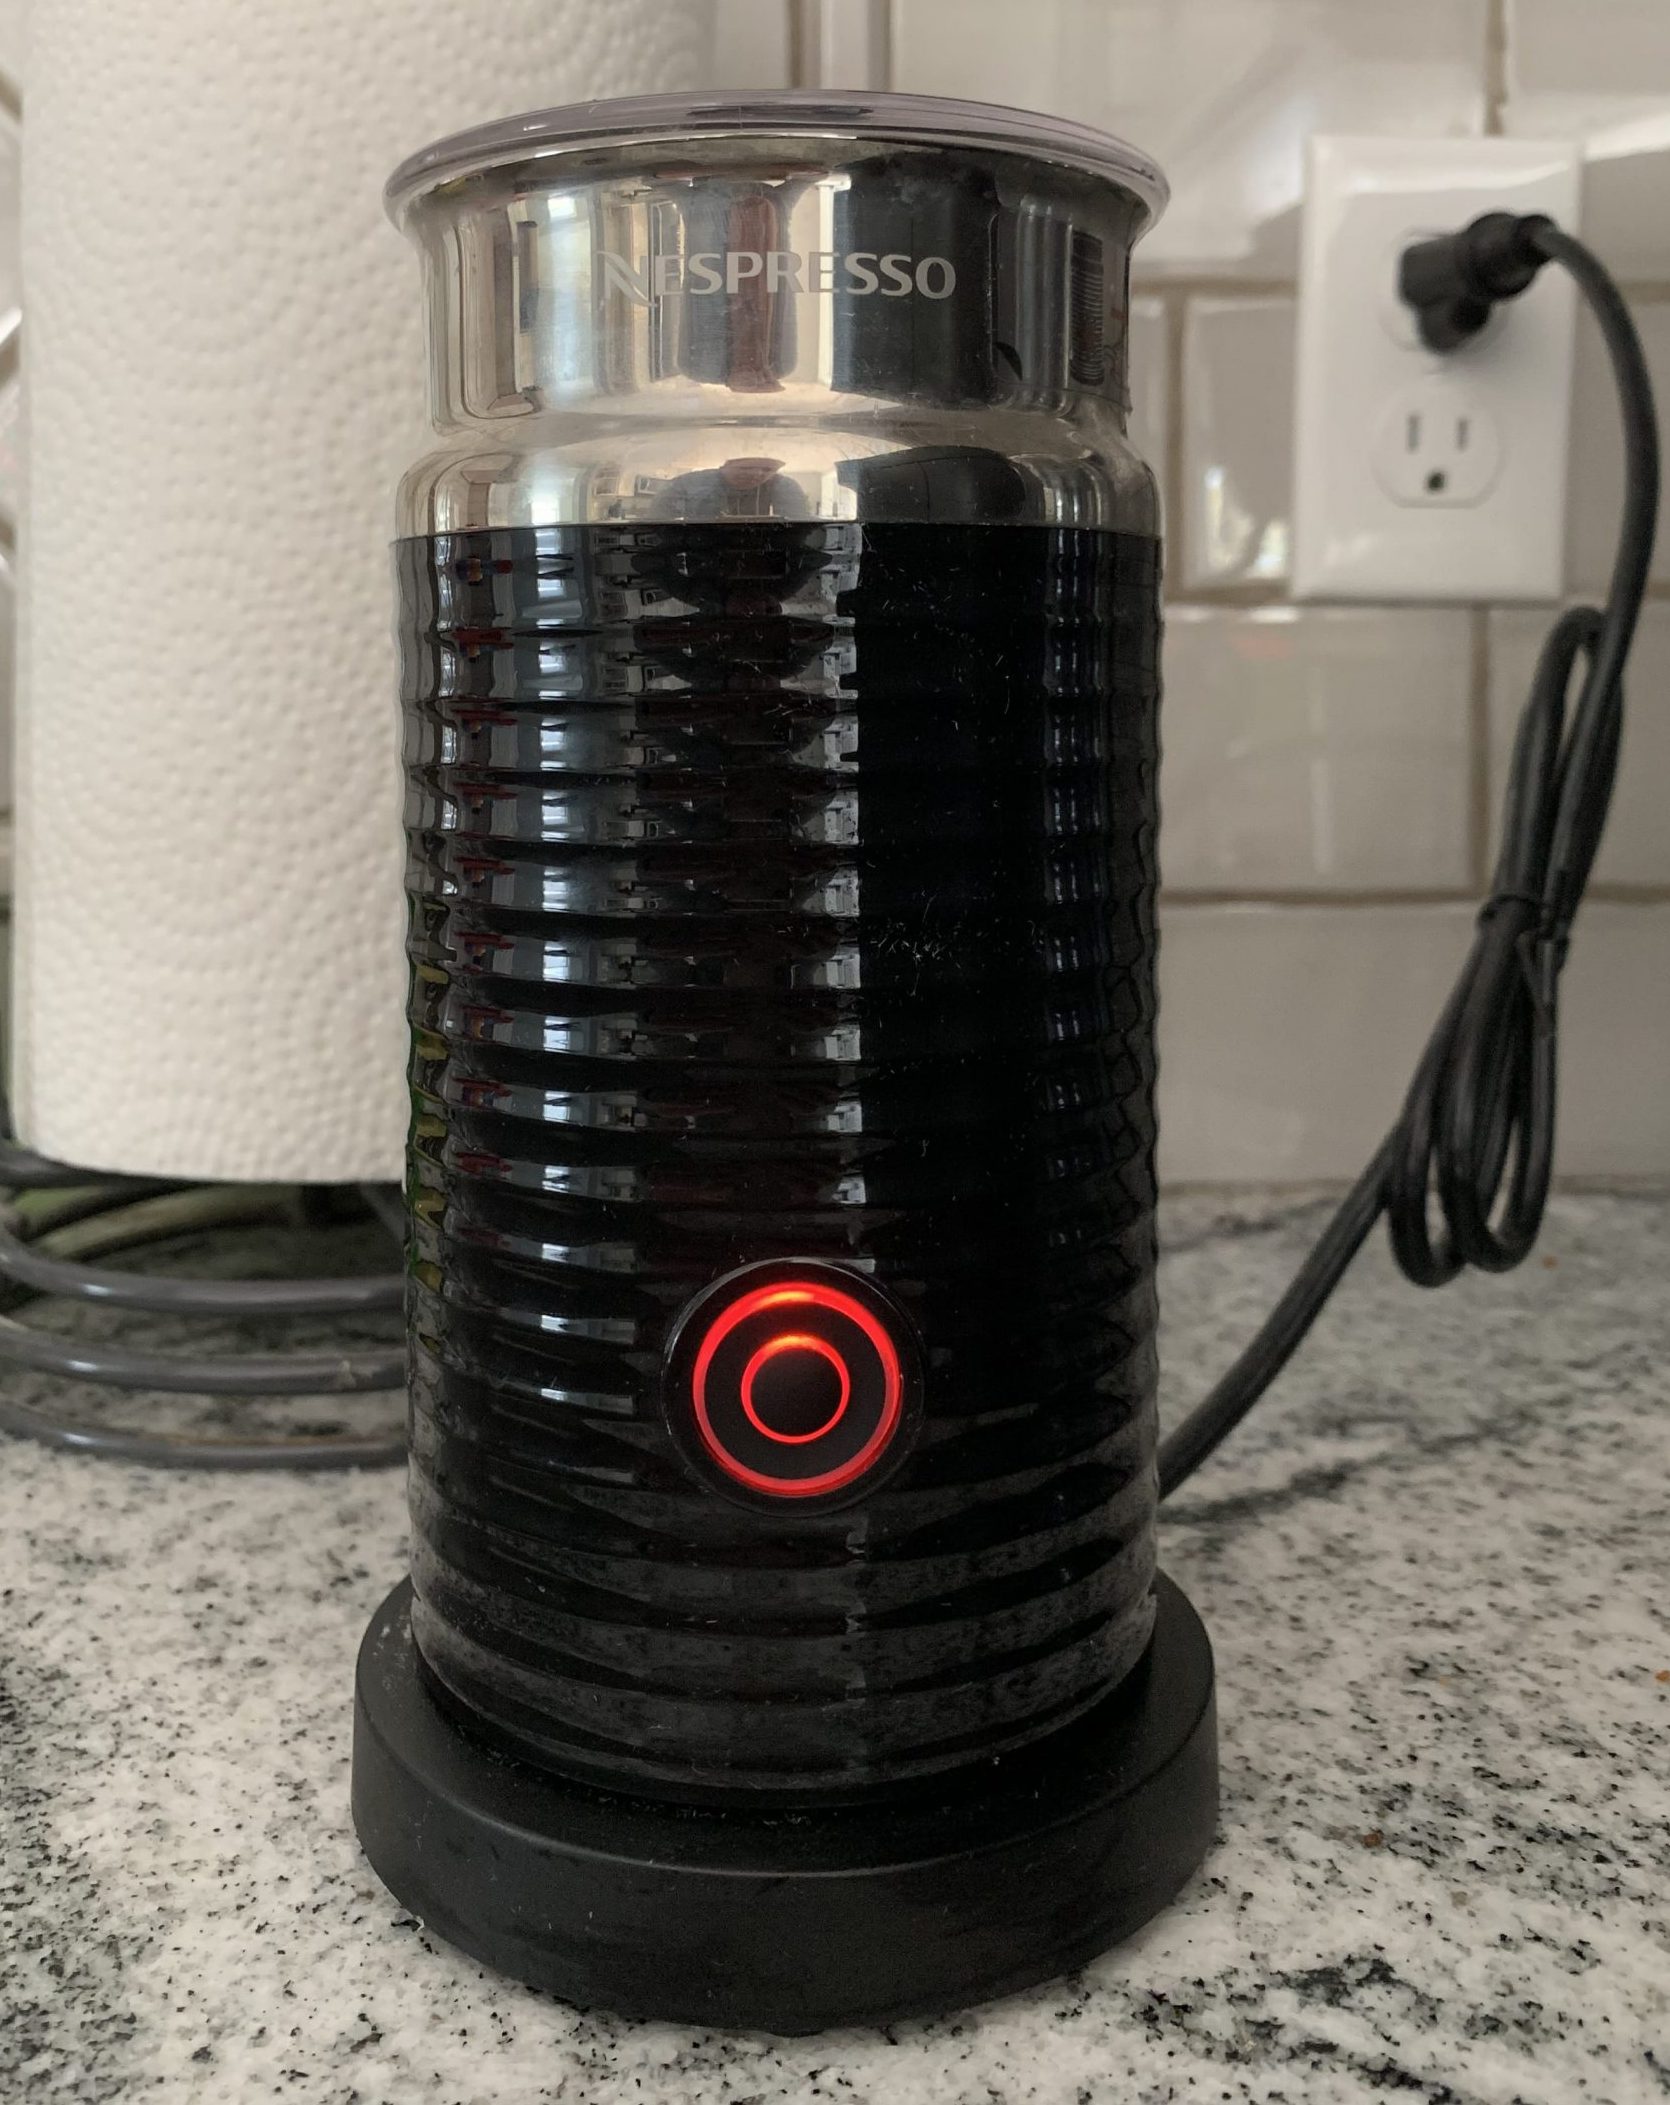 Why Is My Nespresso Frother Blinking Red? Top Solutions